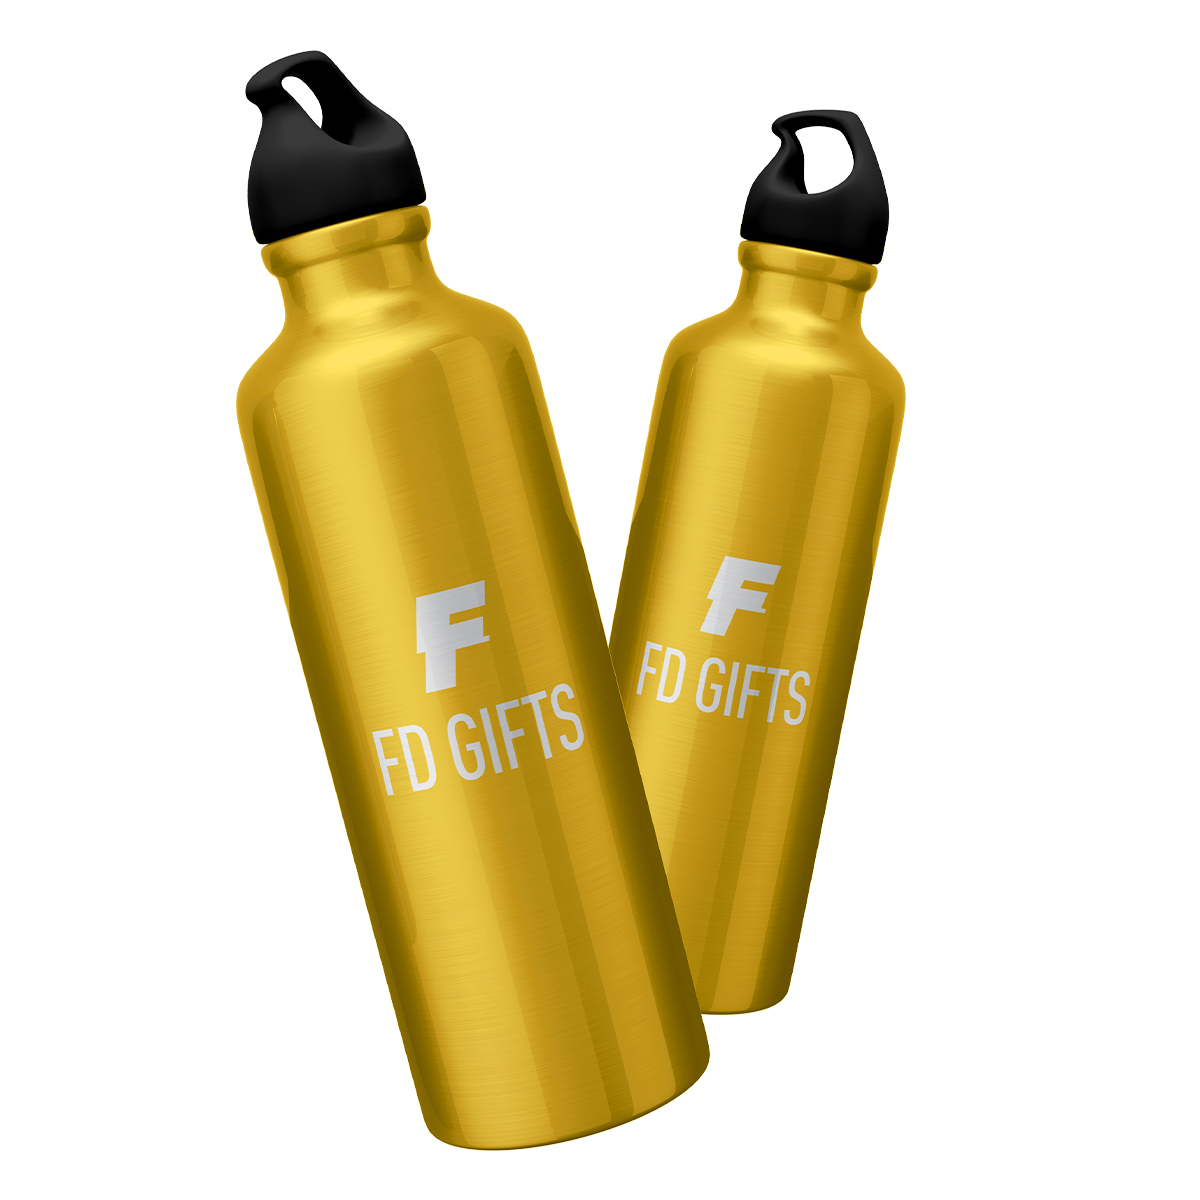 Promotional Custom Outdoor Camping 25oz Aluminum Sports Water Bottle